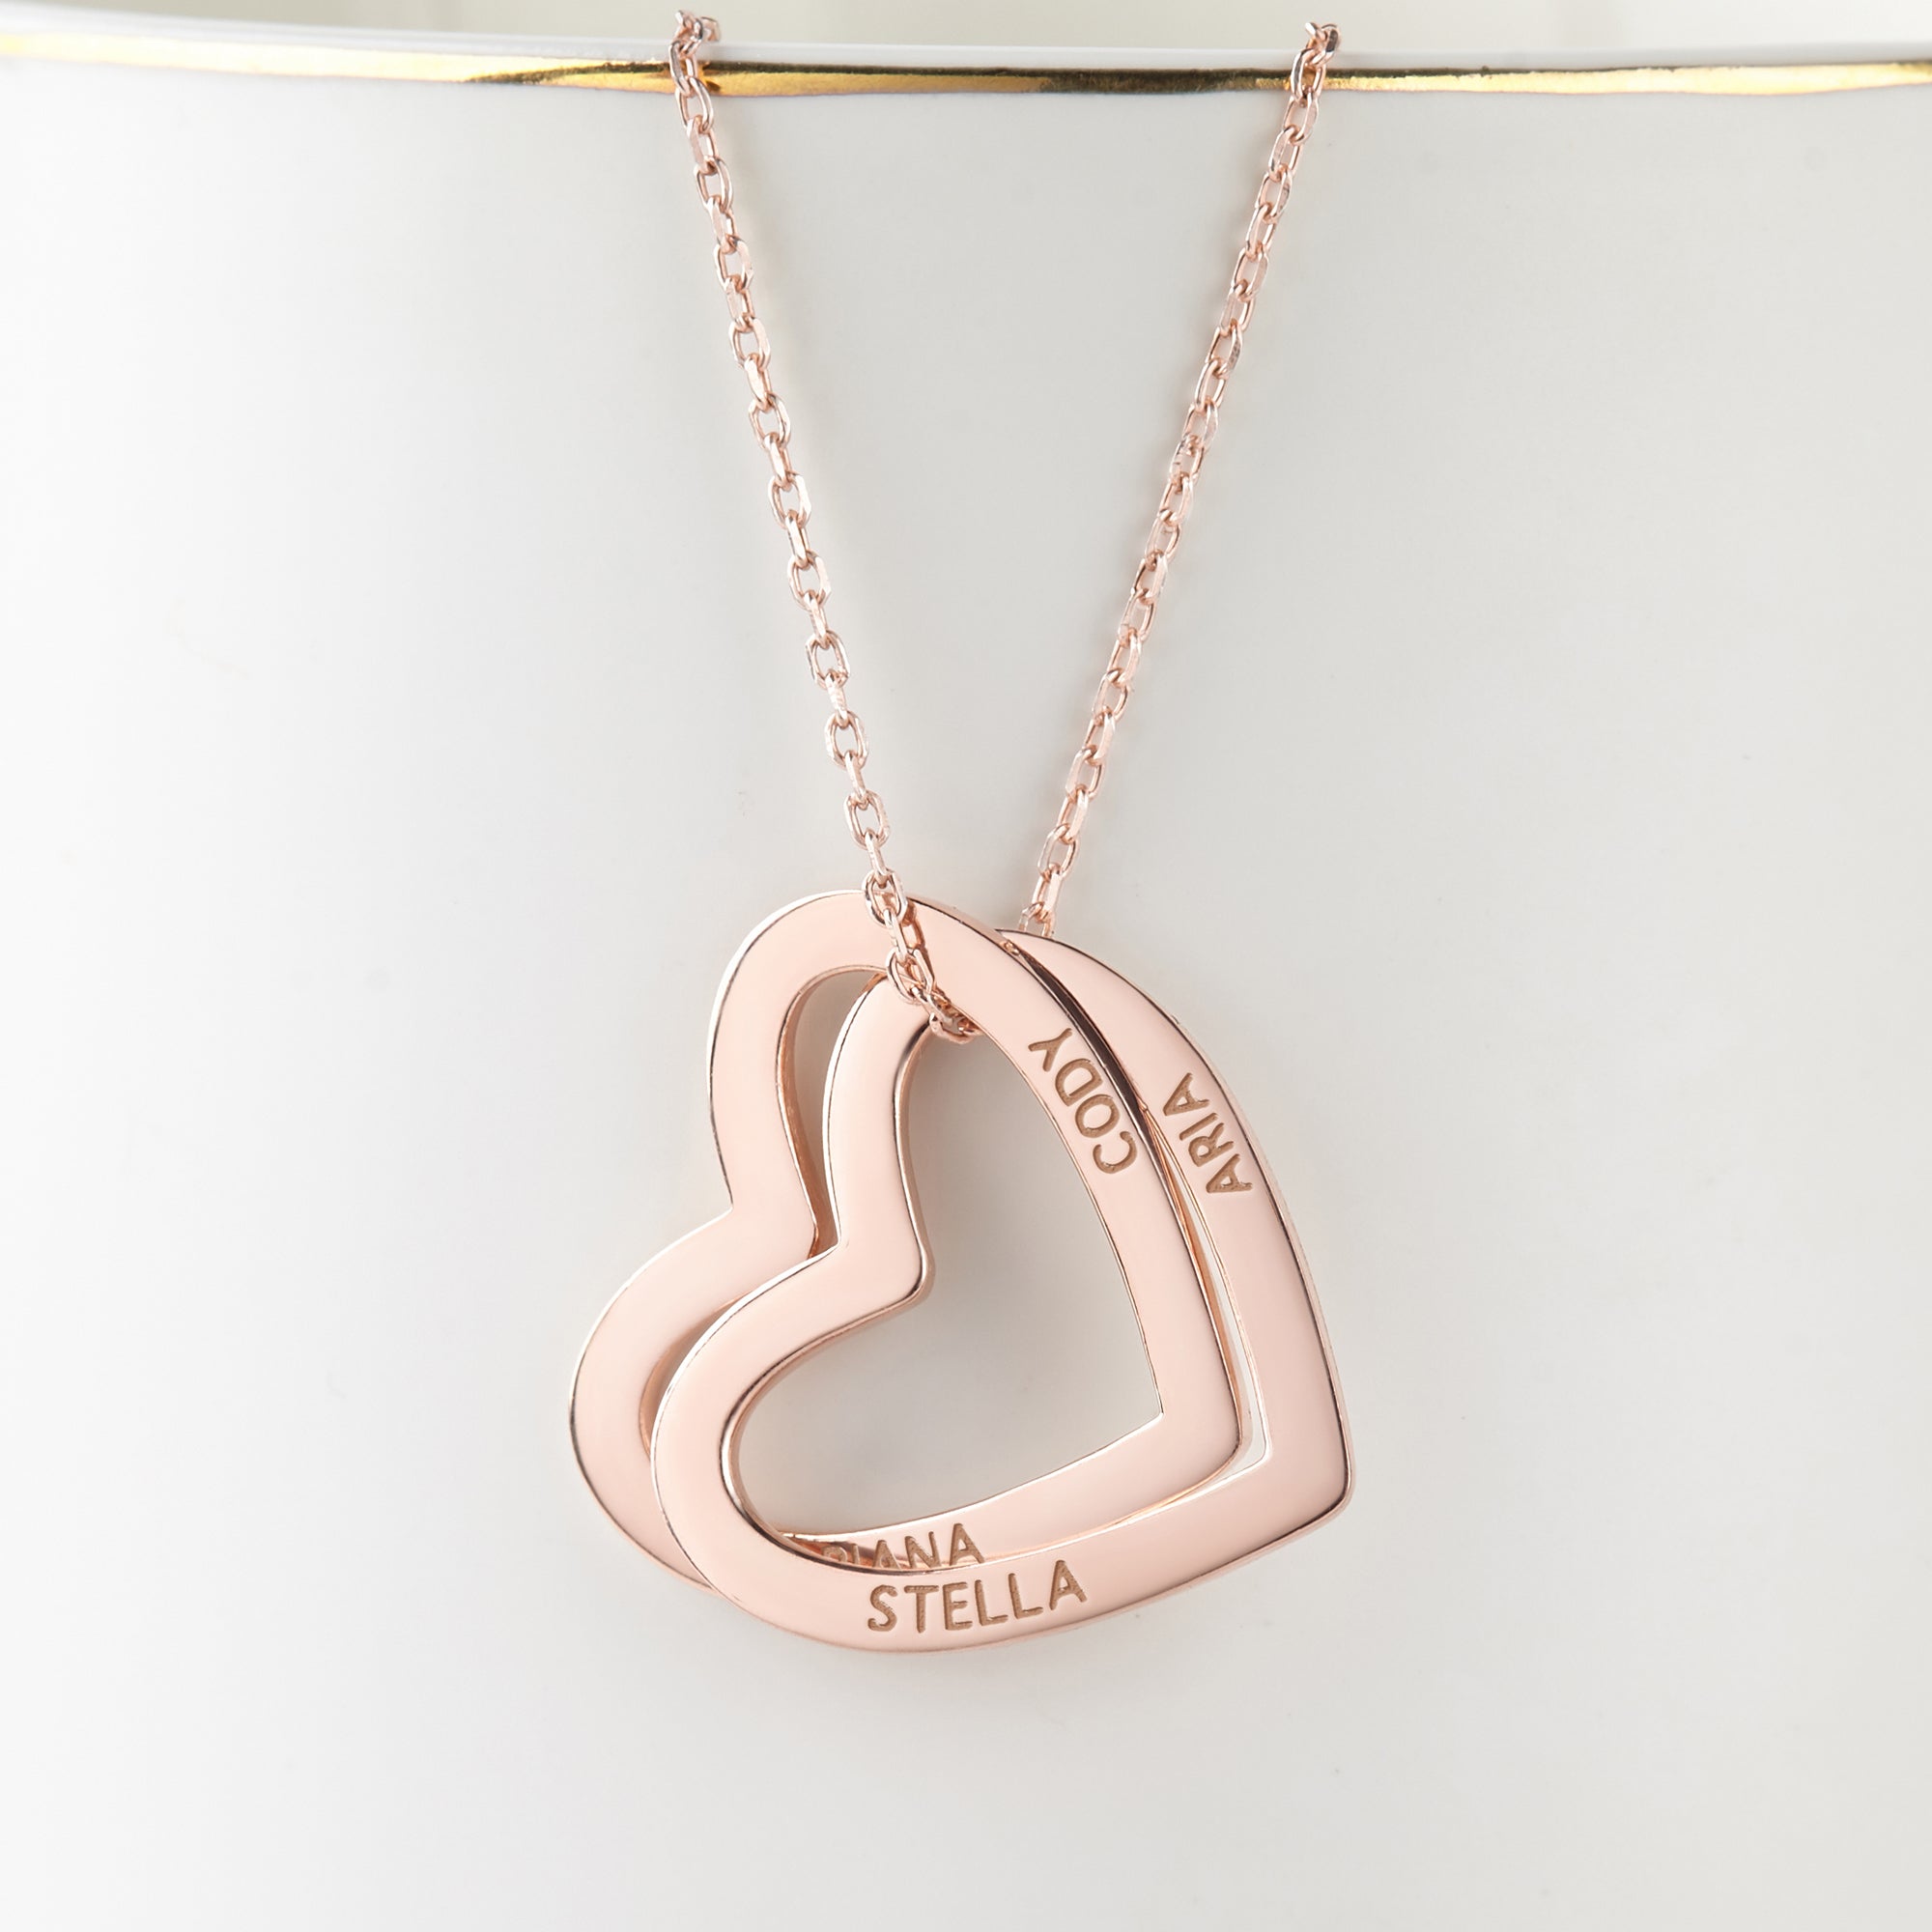 Personalized 3-Heart Necklace for Mom or Grandma | Engraved with Children's Names | Sterling Silver & Gold-Plated - Necklaces - Bijou Her -  -  - 